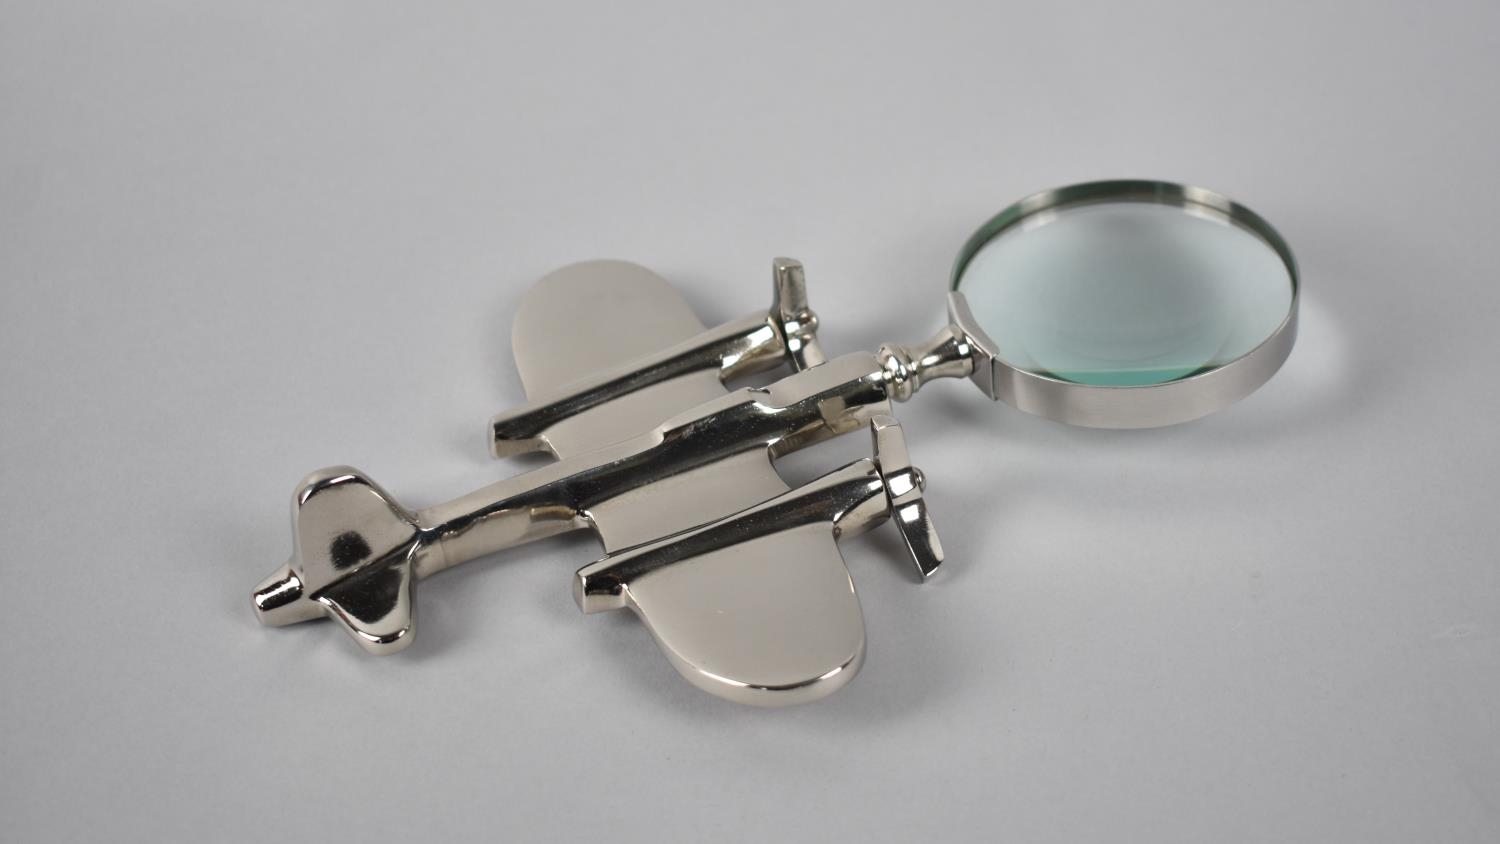 A Reproduction Chrome Metal Novelty Desktop Magnifying Glass in the Form of a Twin Engine Vintage